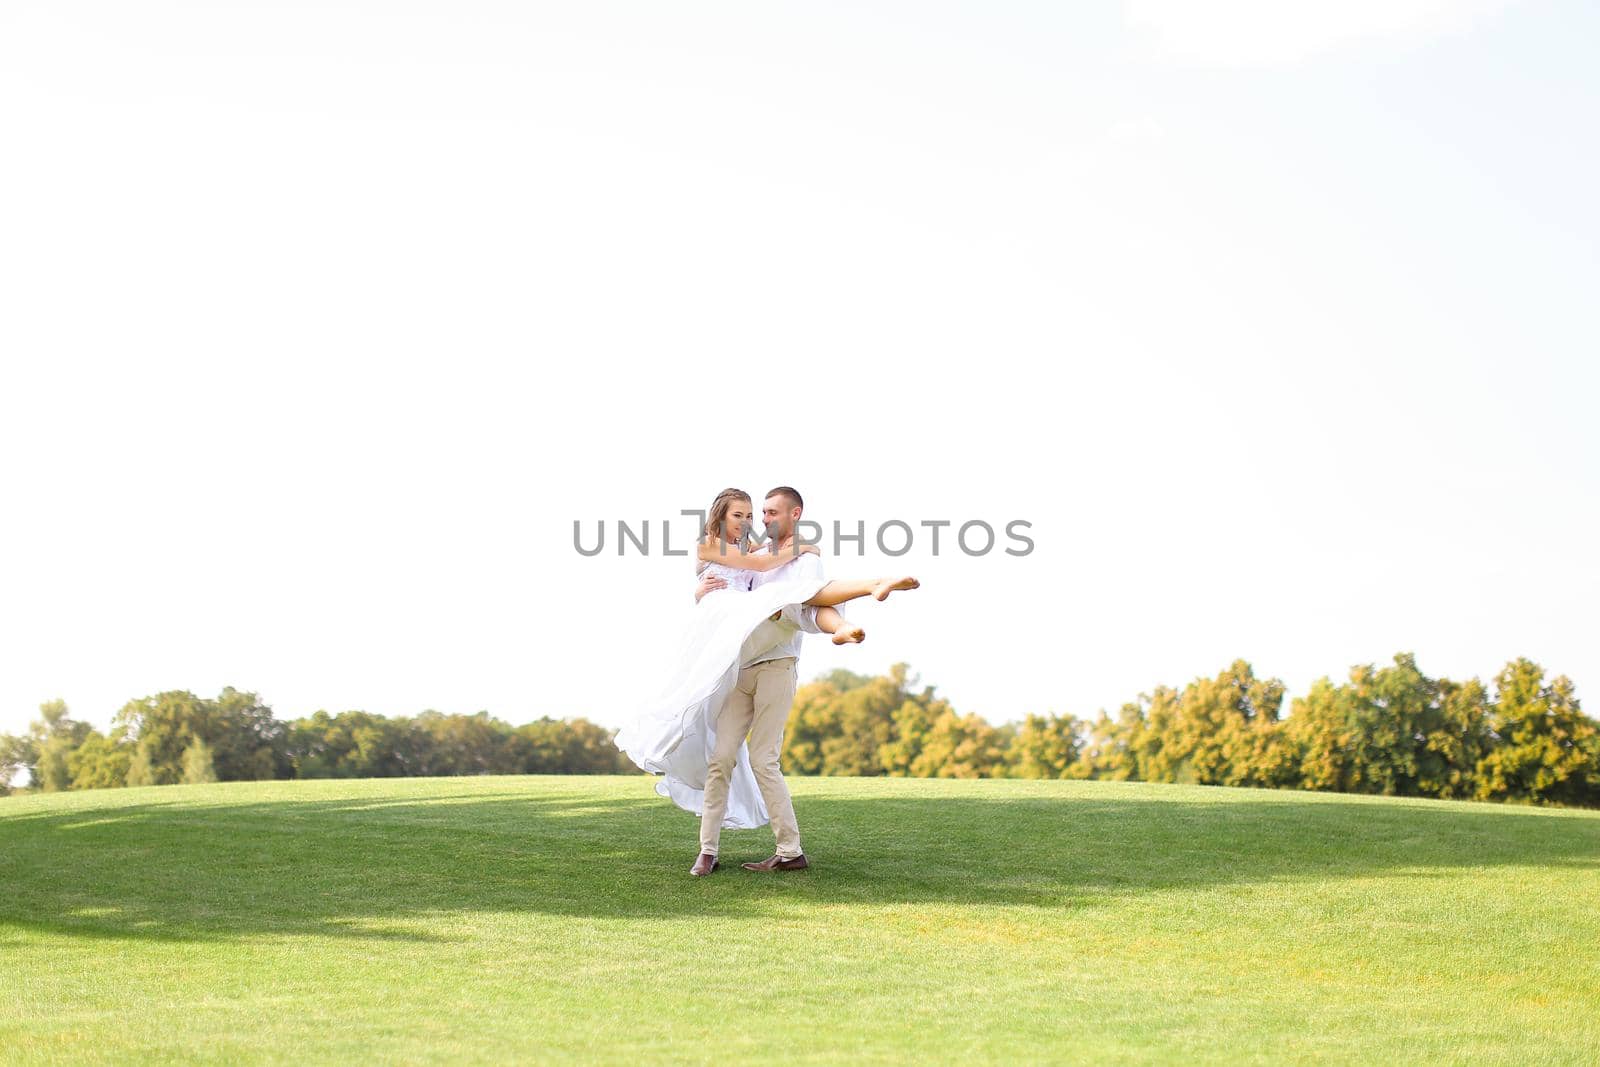 Caucasian groom holding bride on grass in white sky background. Concept of wedding photo session on nature.